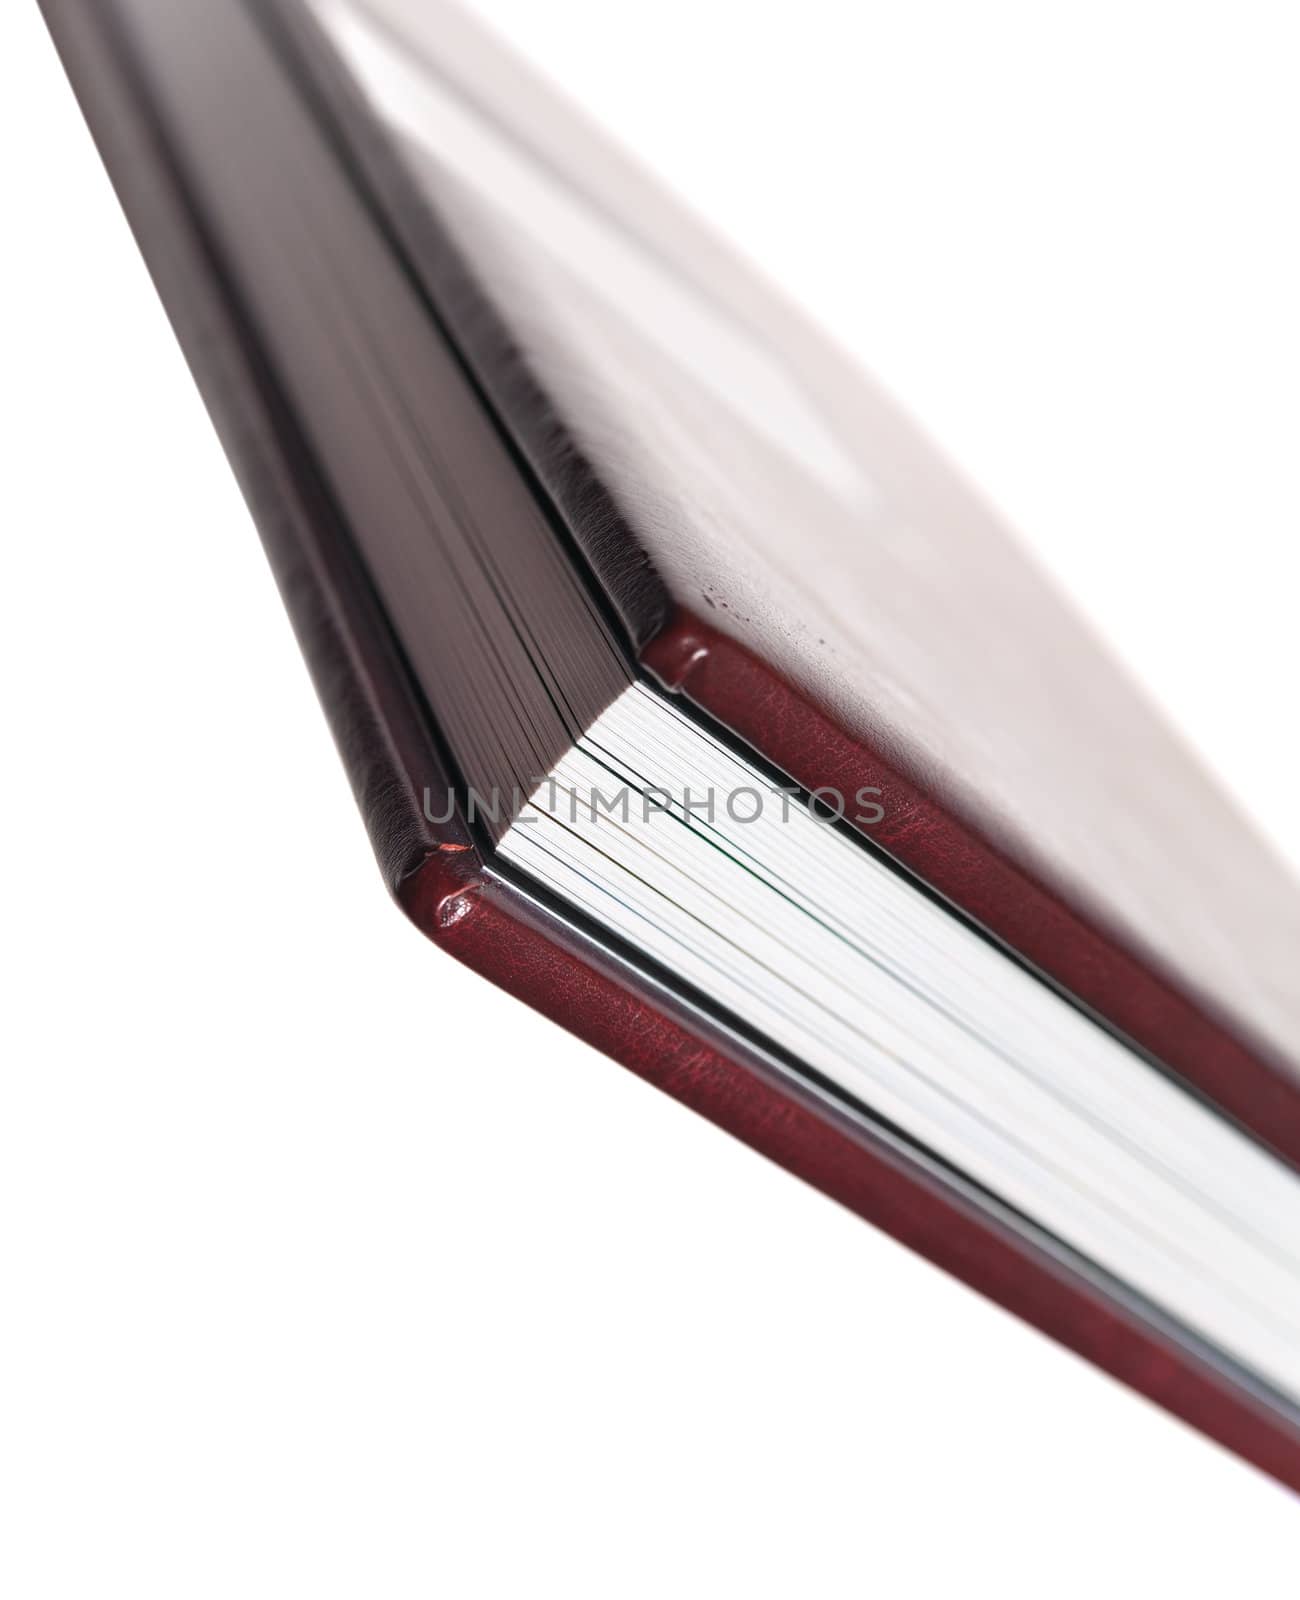 side view of book with leatherette cover on white backgrounds